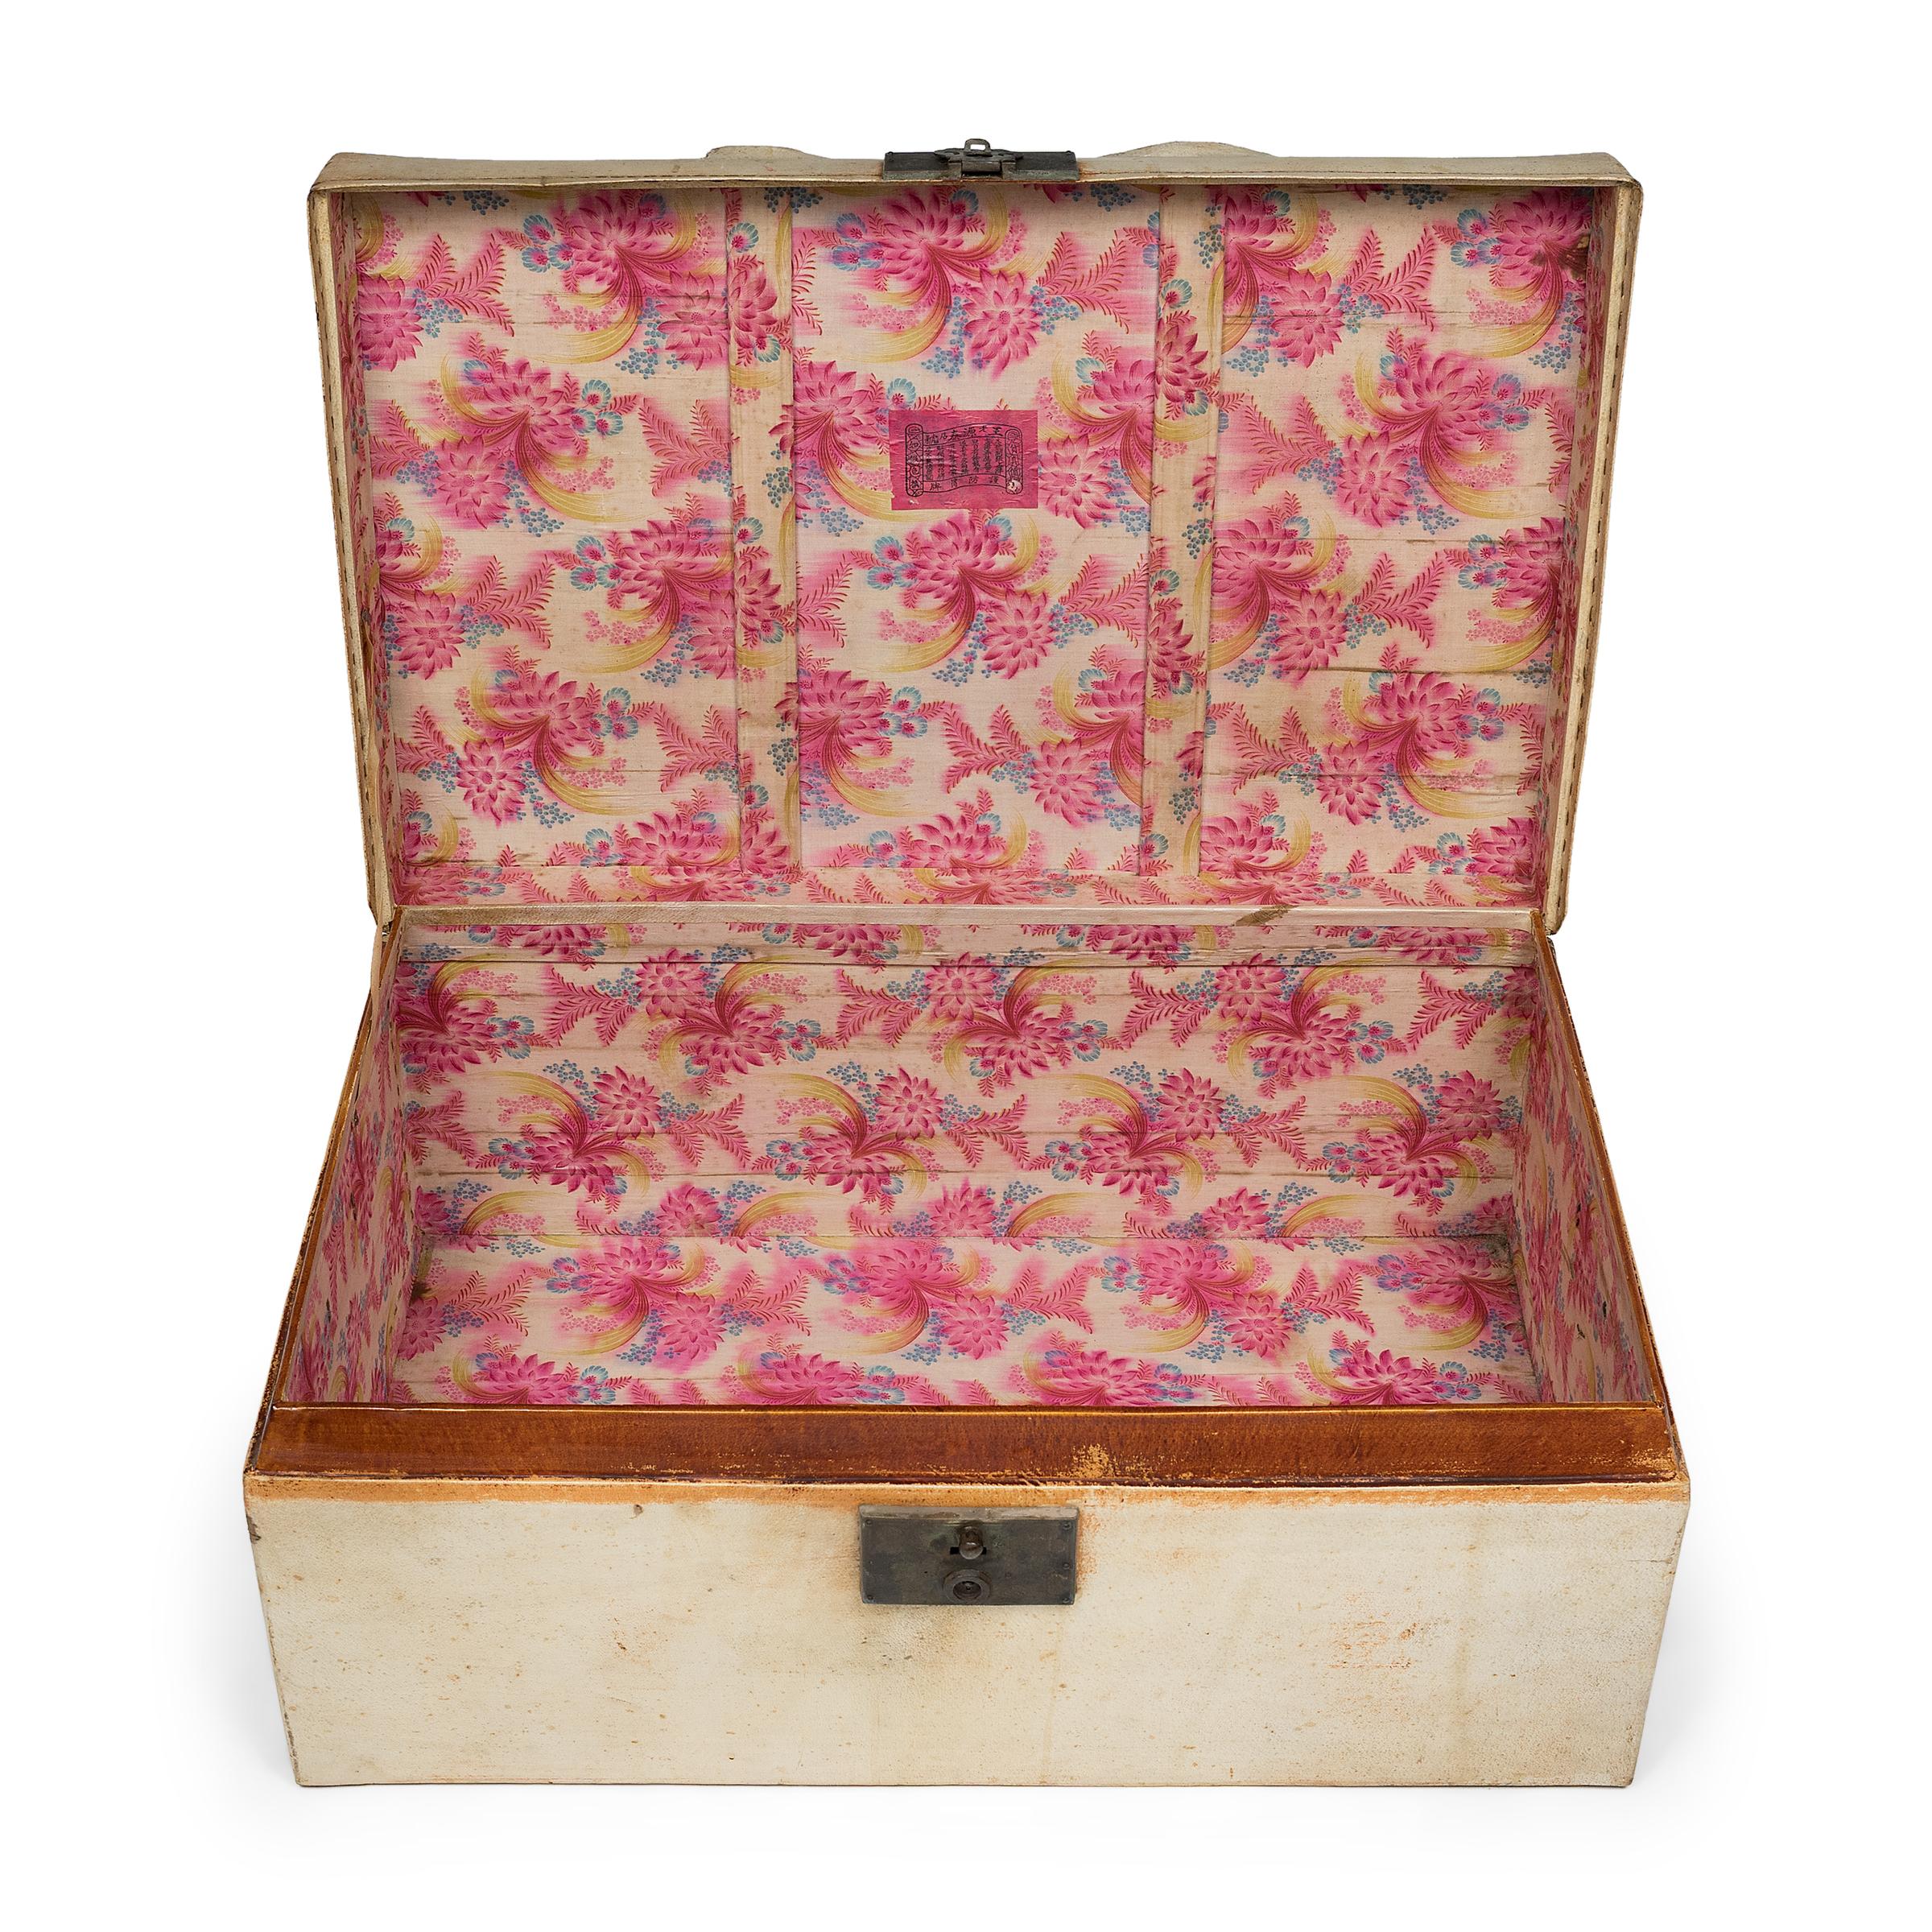 Chinese Blonde Hide Storage Trunk, c. 1800 For Sale 2